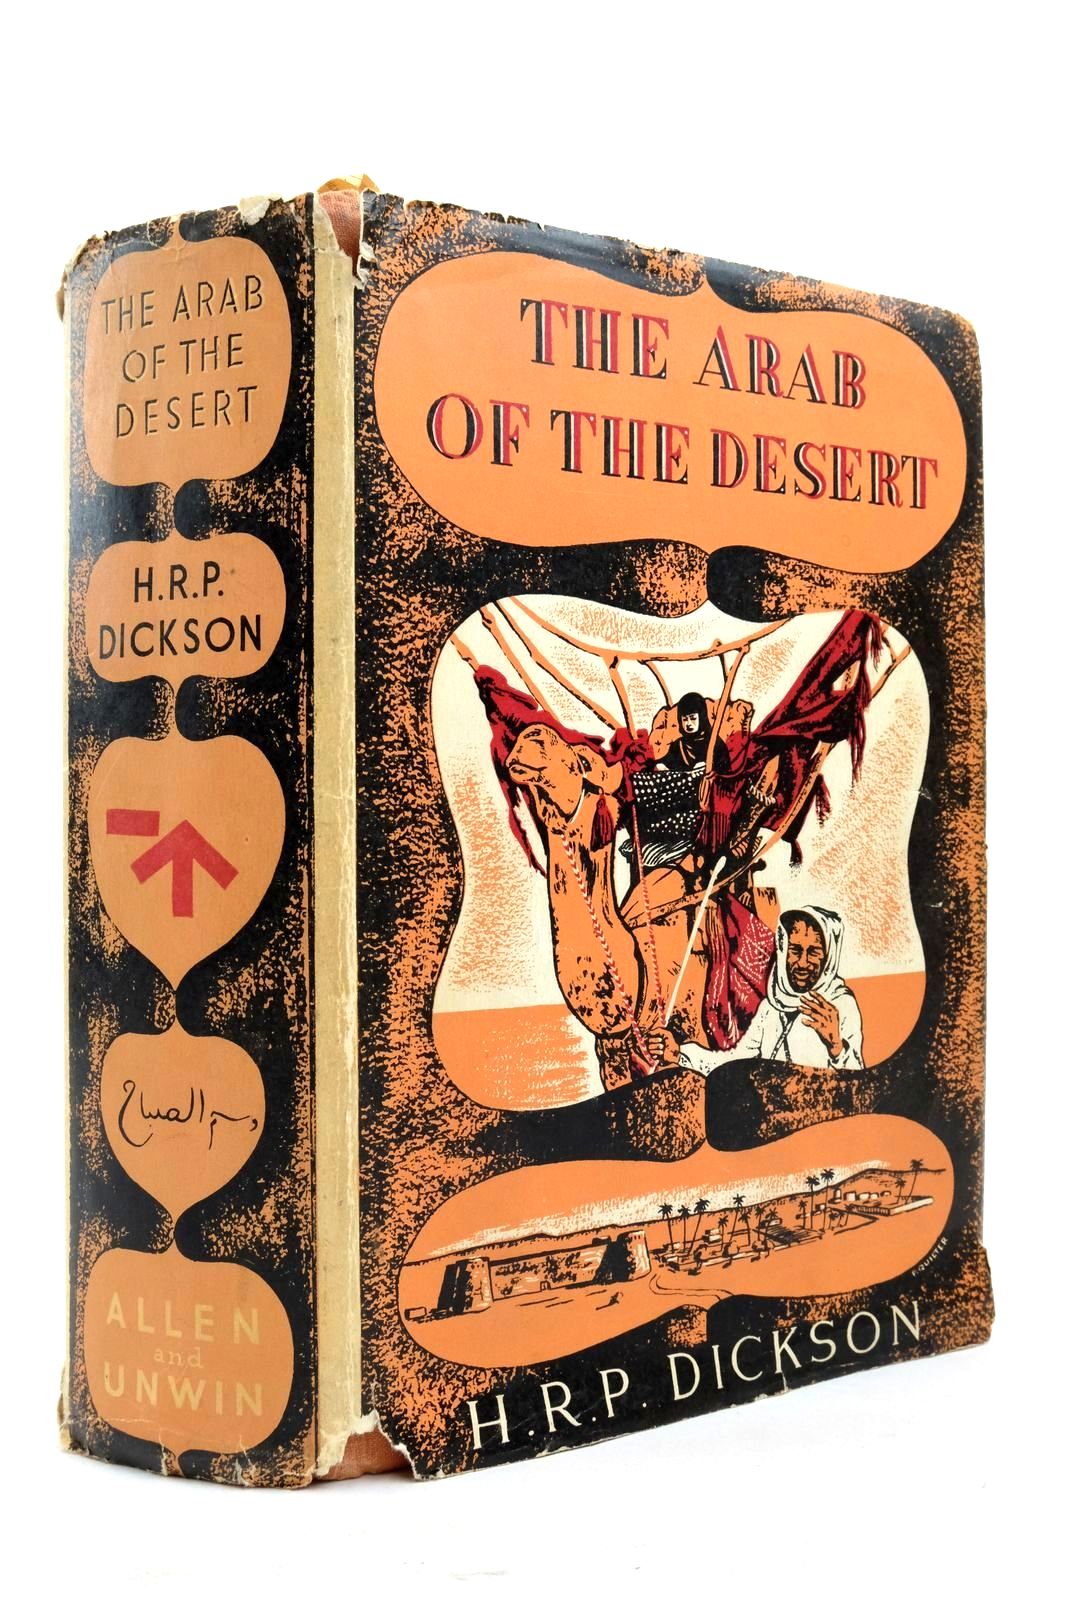 Photo of THE ARAB OF THE DESERT written by Dickson, H.R.P. published by George Allen & Unwin Ltd. (STOCK CODE: 2137743)  for sale by Stella & Rose's Books